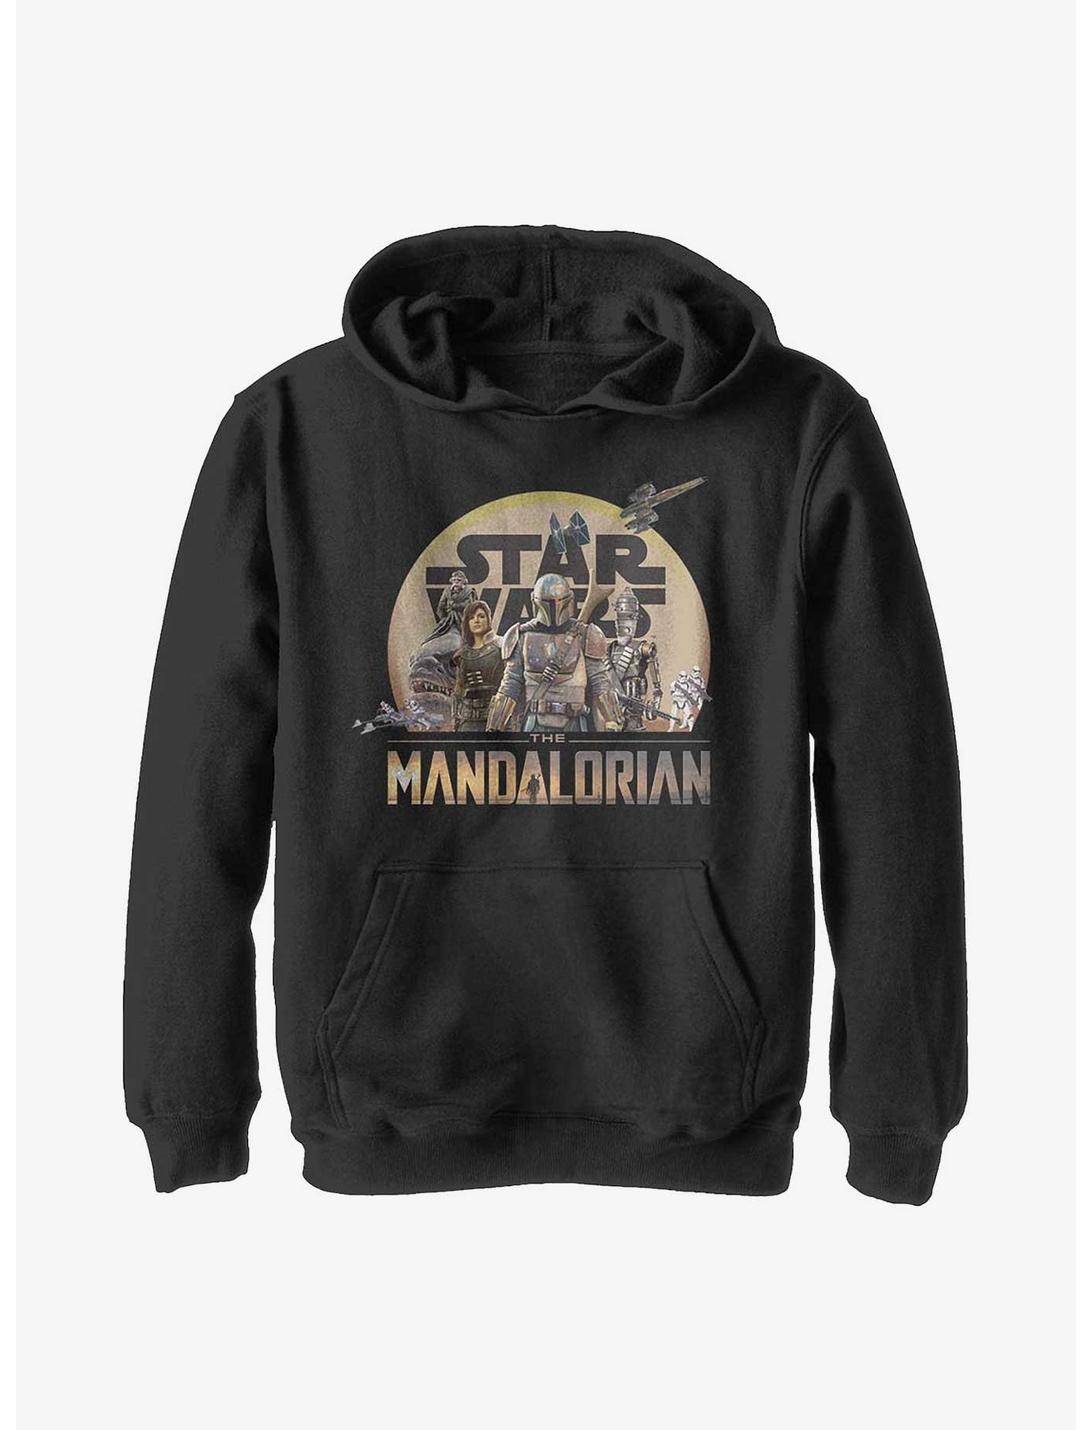 Star Wars The Mandalorian Character Action Pose Youth Hoodie, BLACK, hi-res